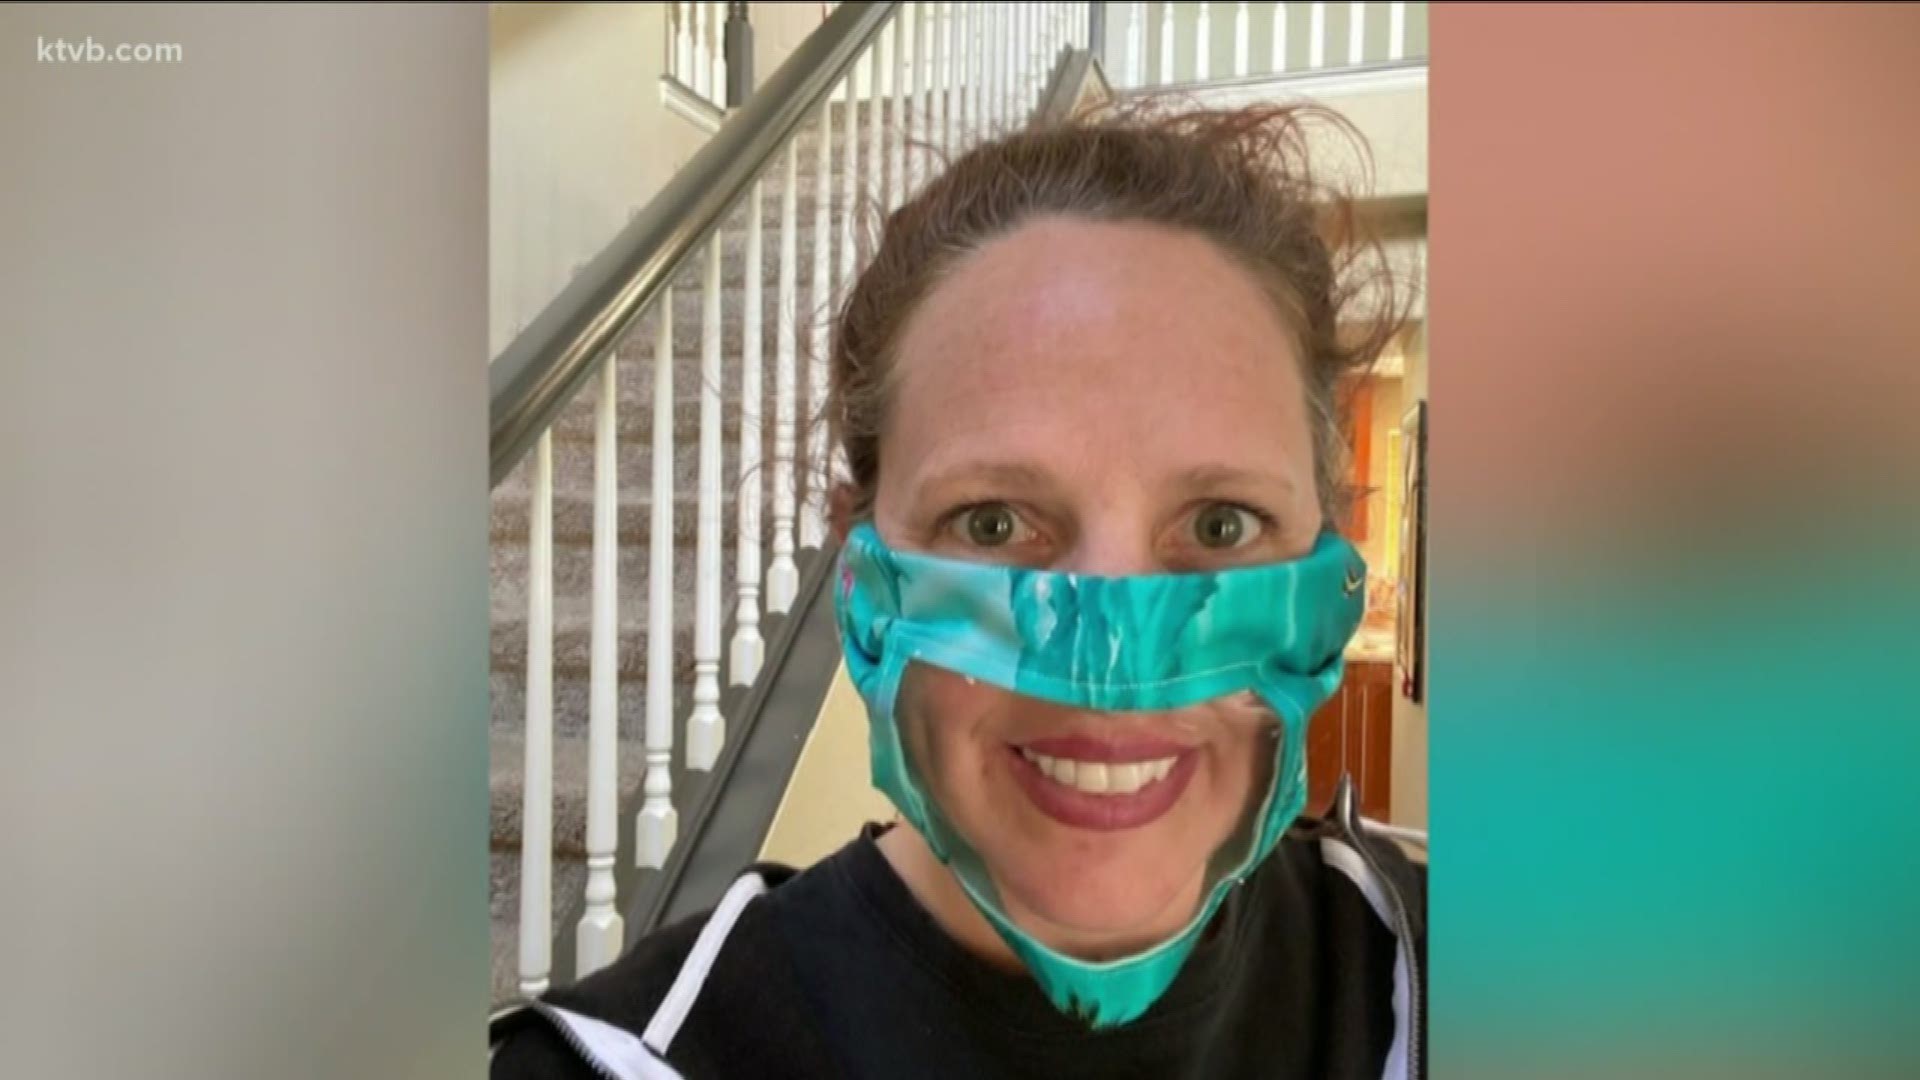 As the demand for face masks continues, one family is making sure that the deaf can read lips with their own clear face masks.